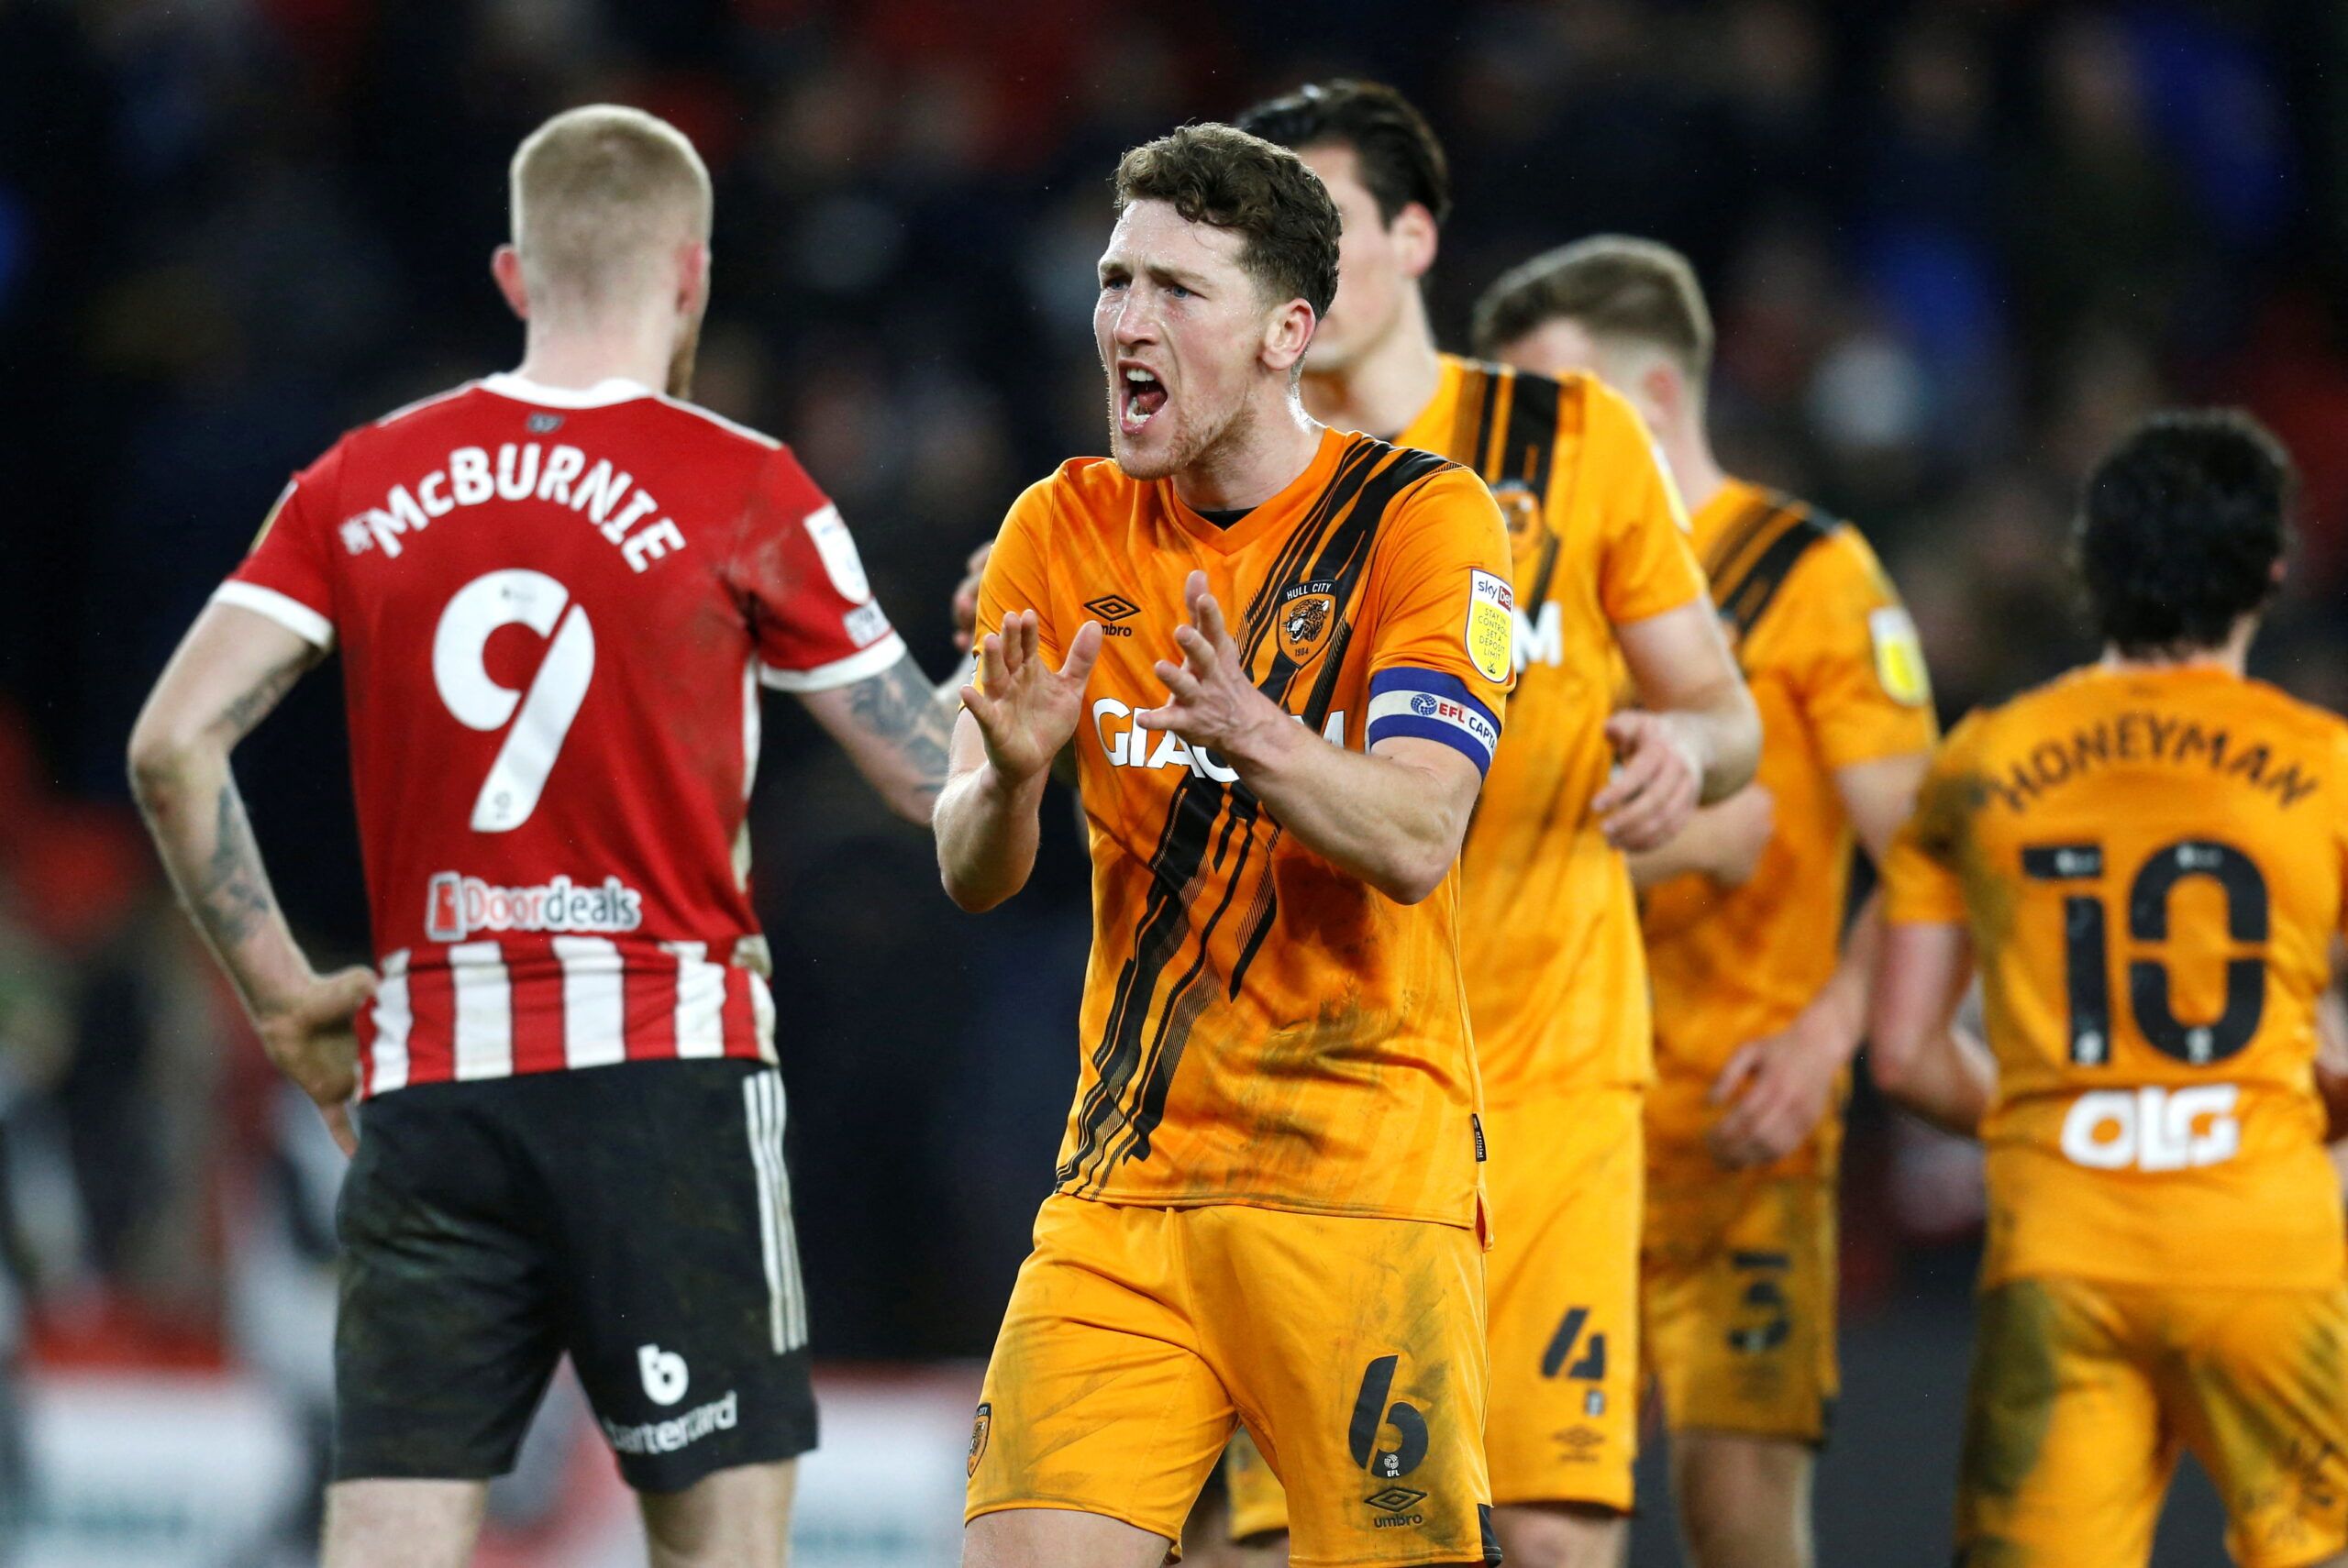 Soccer Football - Championship - Sheffield United v Hull City - Bramall Lane, Sheffield, Britain - February 15, 2022 Hull City's Richie Smallwood reacts after the match Action Images/Ed Sykes  EDITORIAL USE ONLY. No use with unauthorized audio, video, data, fixture lists, club/league logos or 